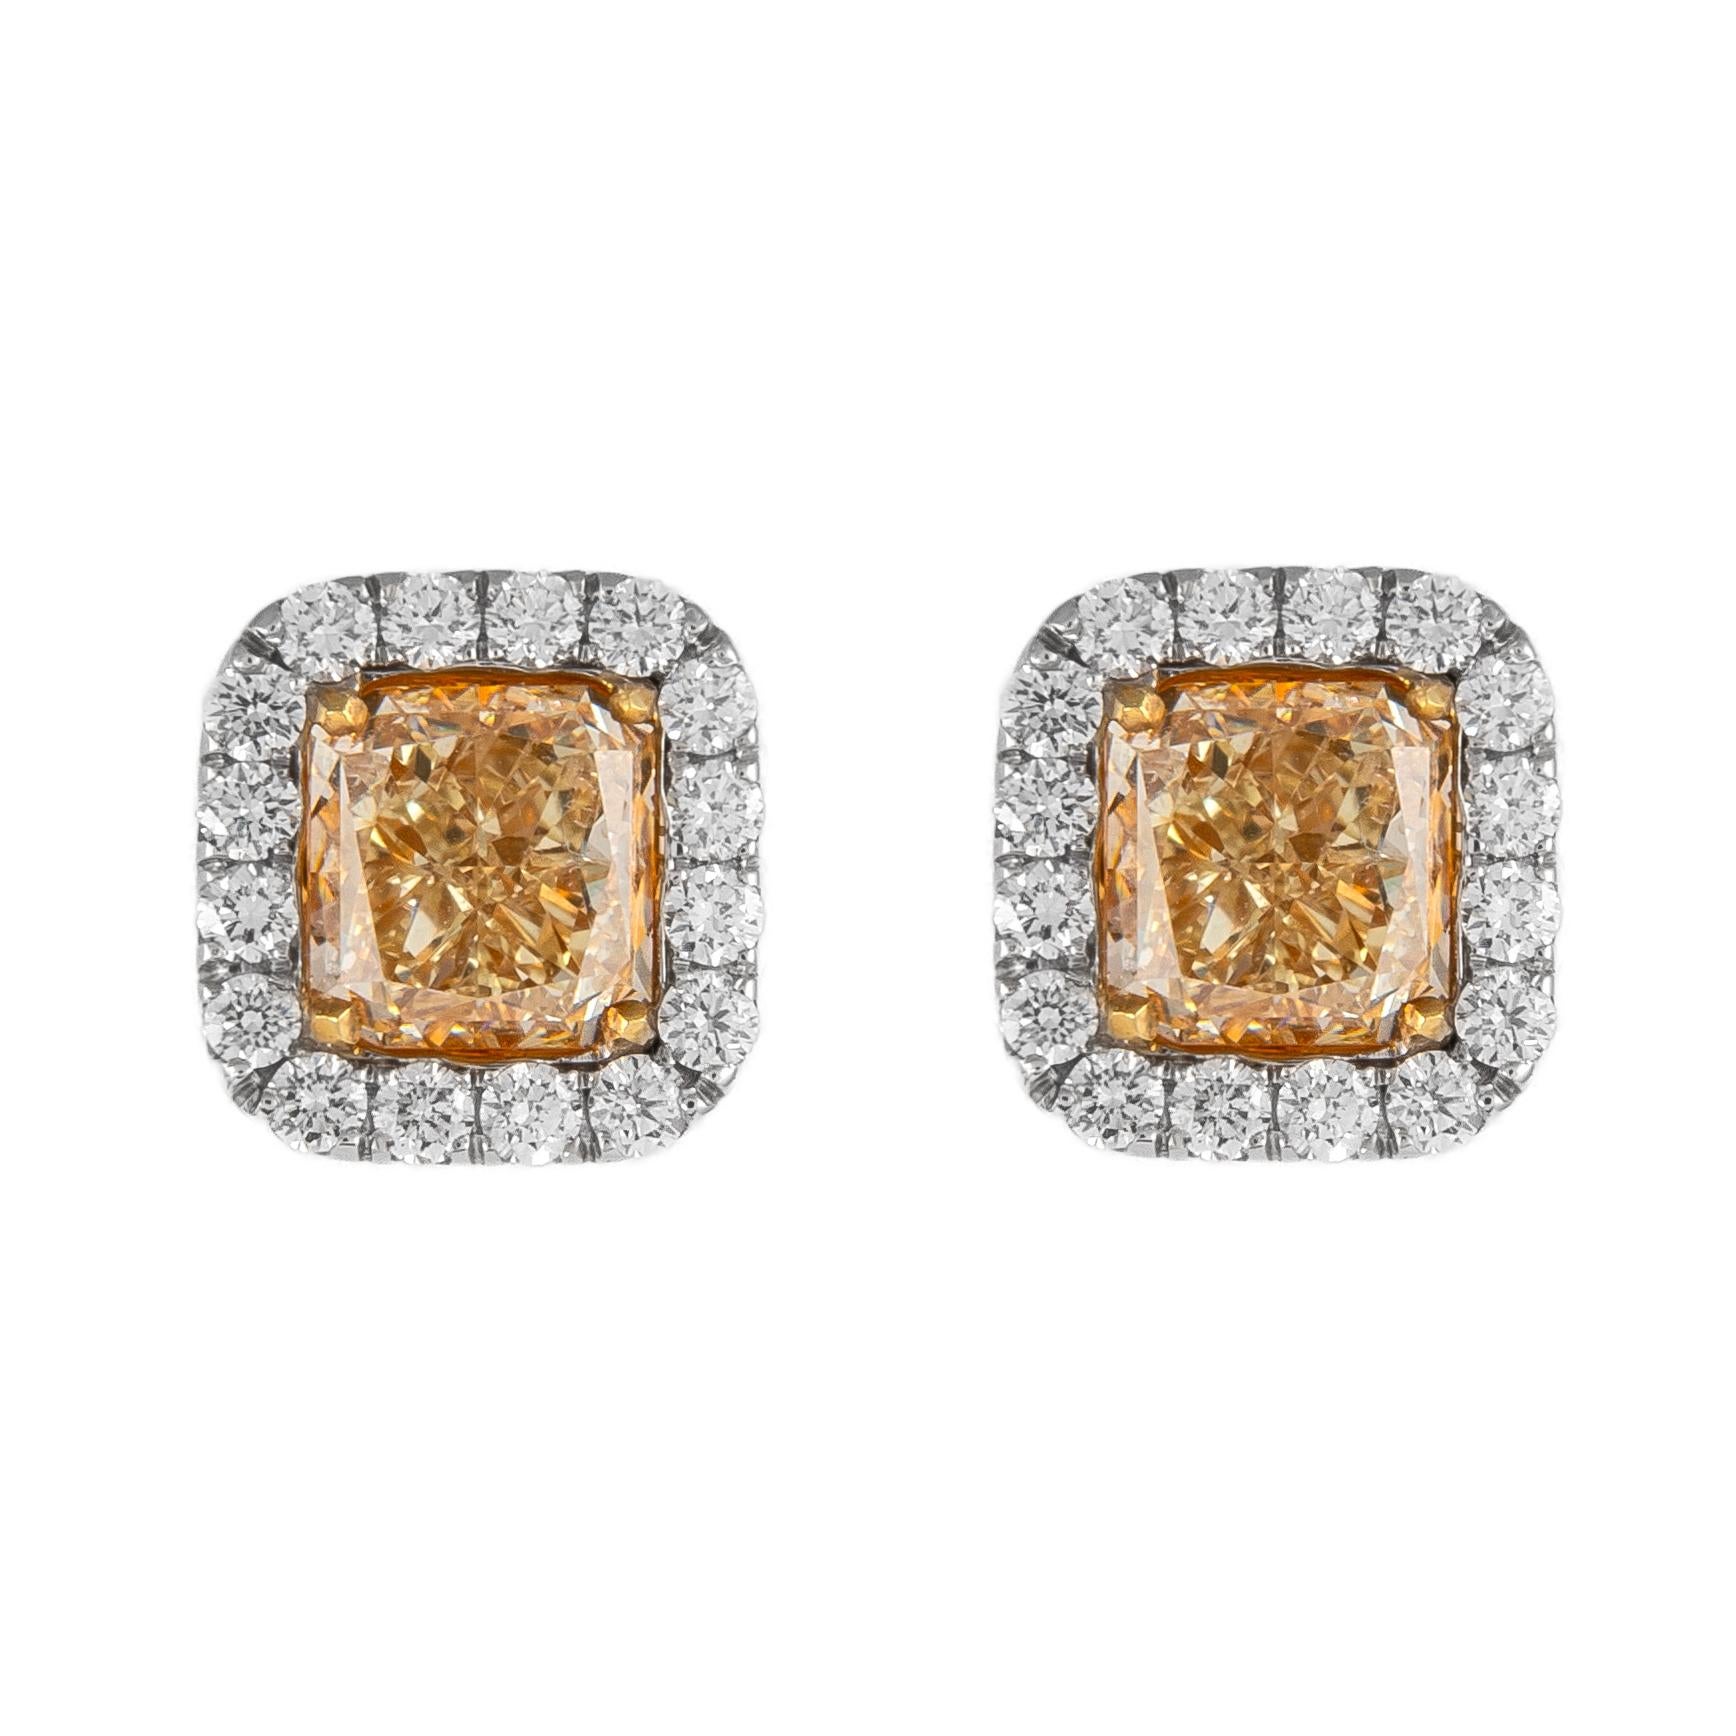 Contemporary 3.88ct Fancy Yellow Diamond Stud Earrings with Halo 18k For Sale